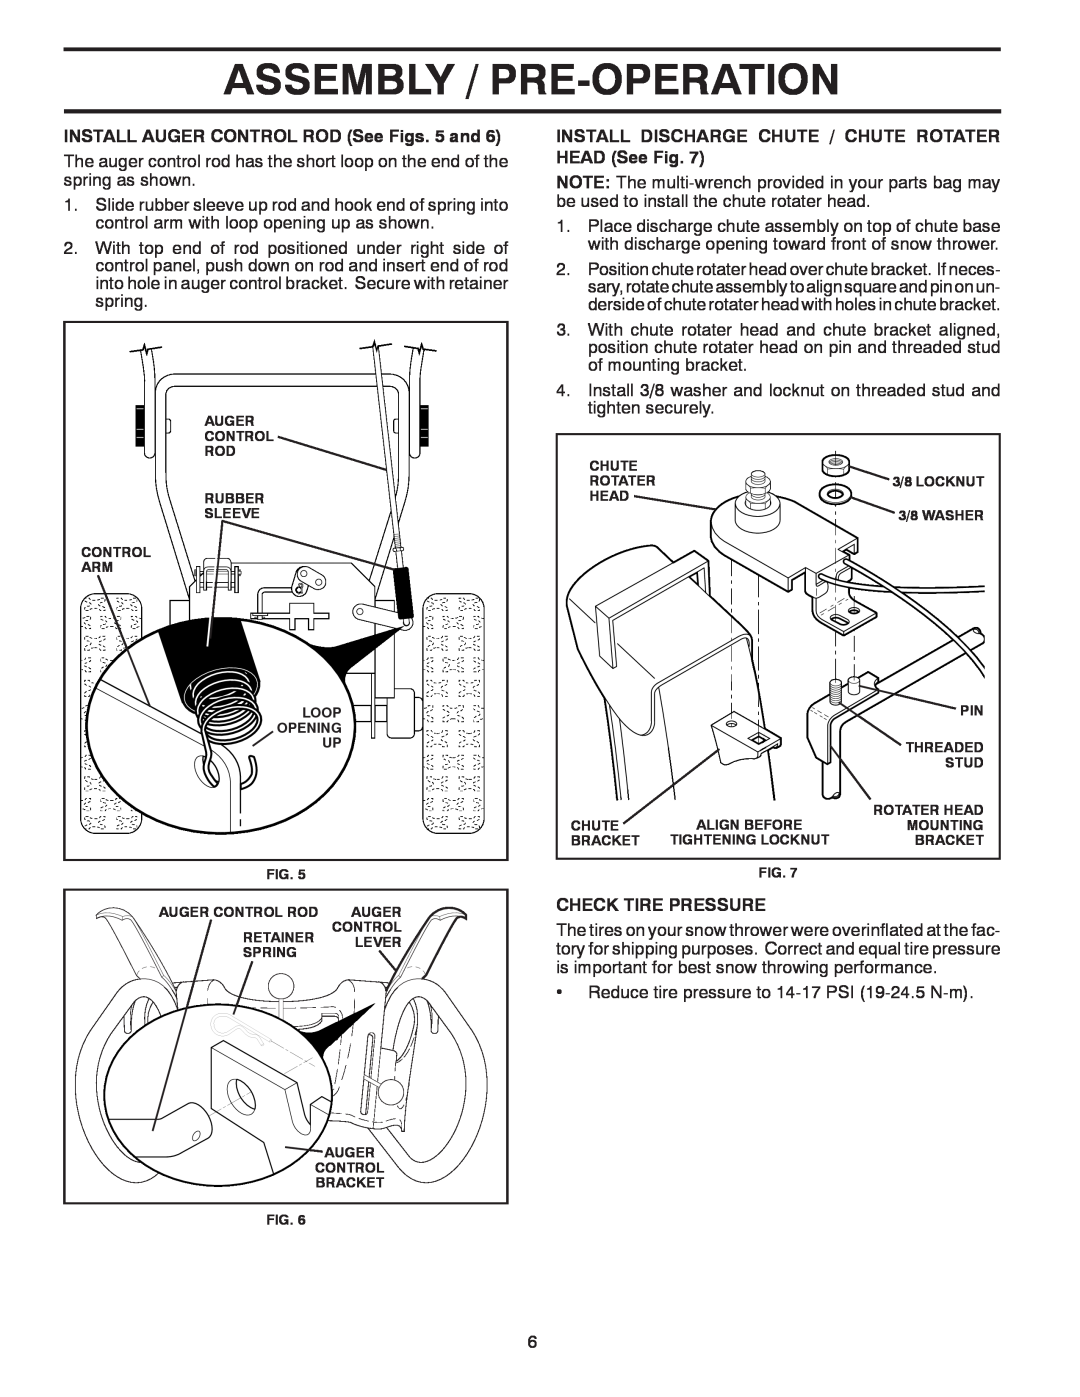 Poulan 421888 owner manual Assembly / Pre-Operation, INSTALL AUGER CONTROL ROD See Figs. 5 and, Check Tire Pressure 